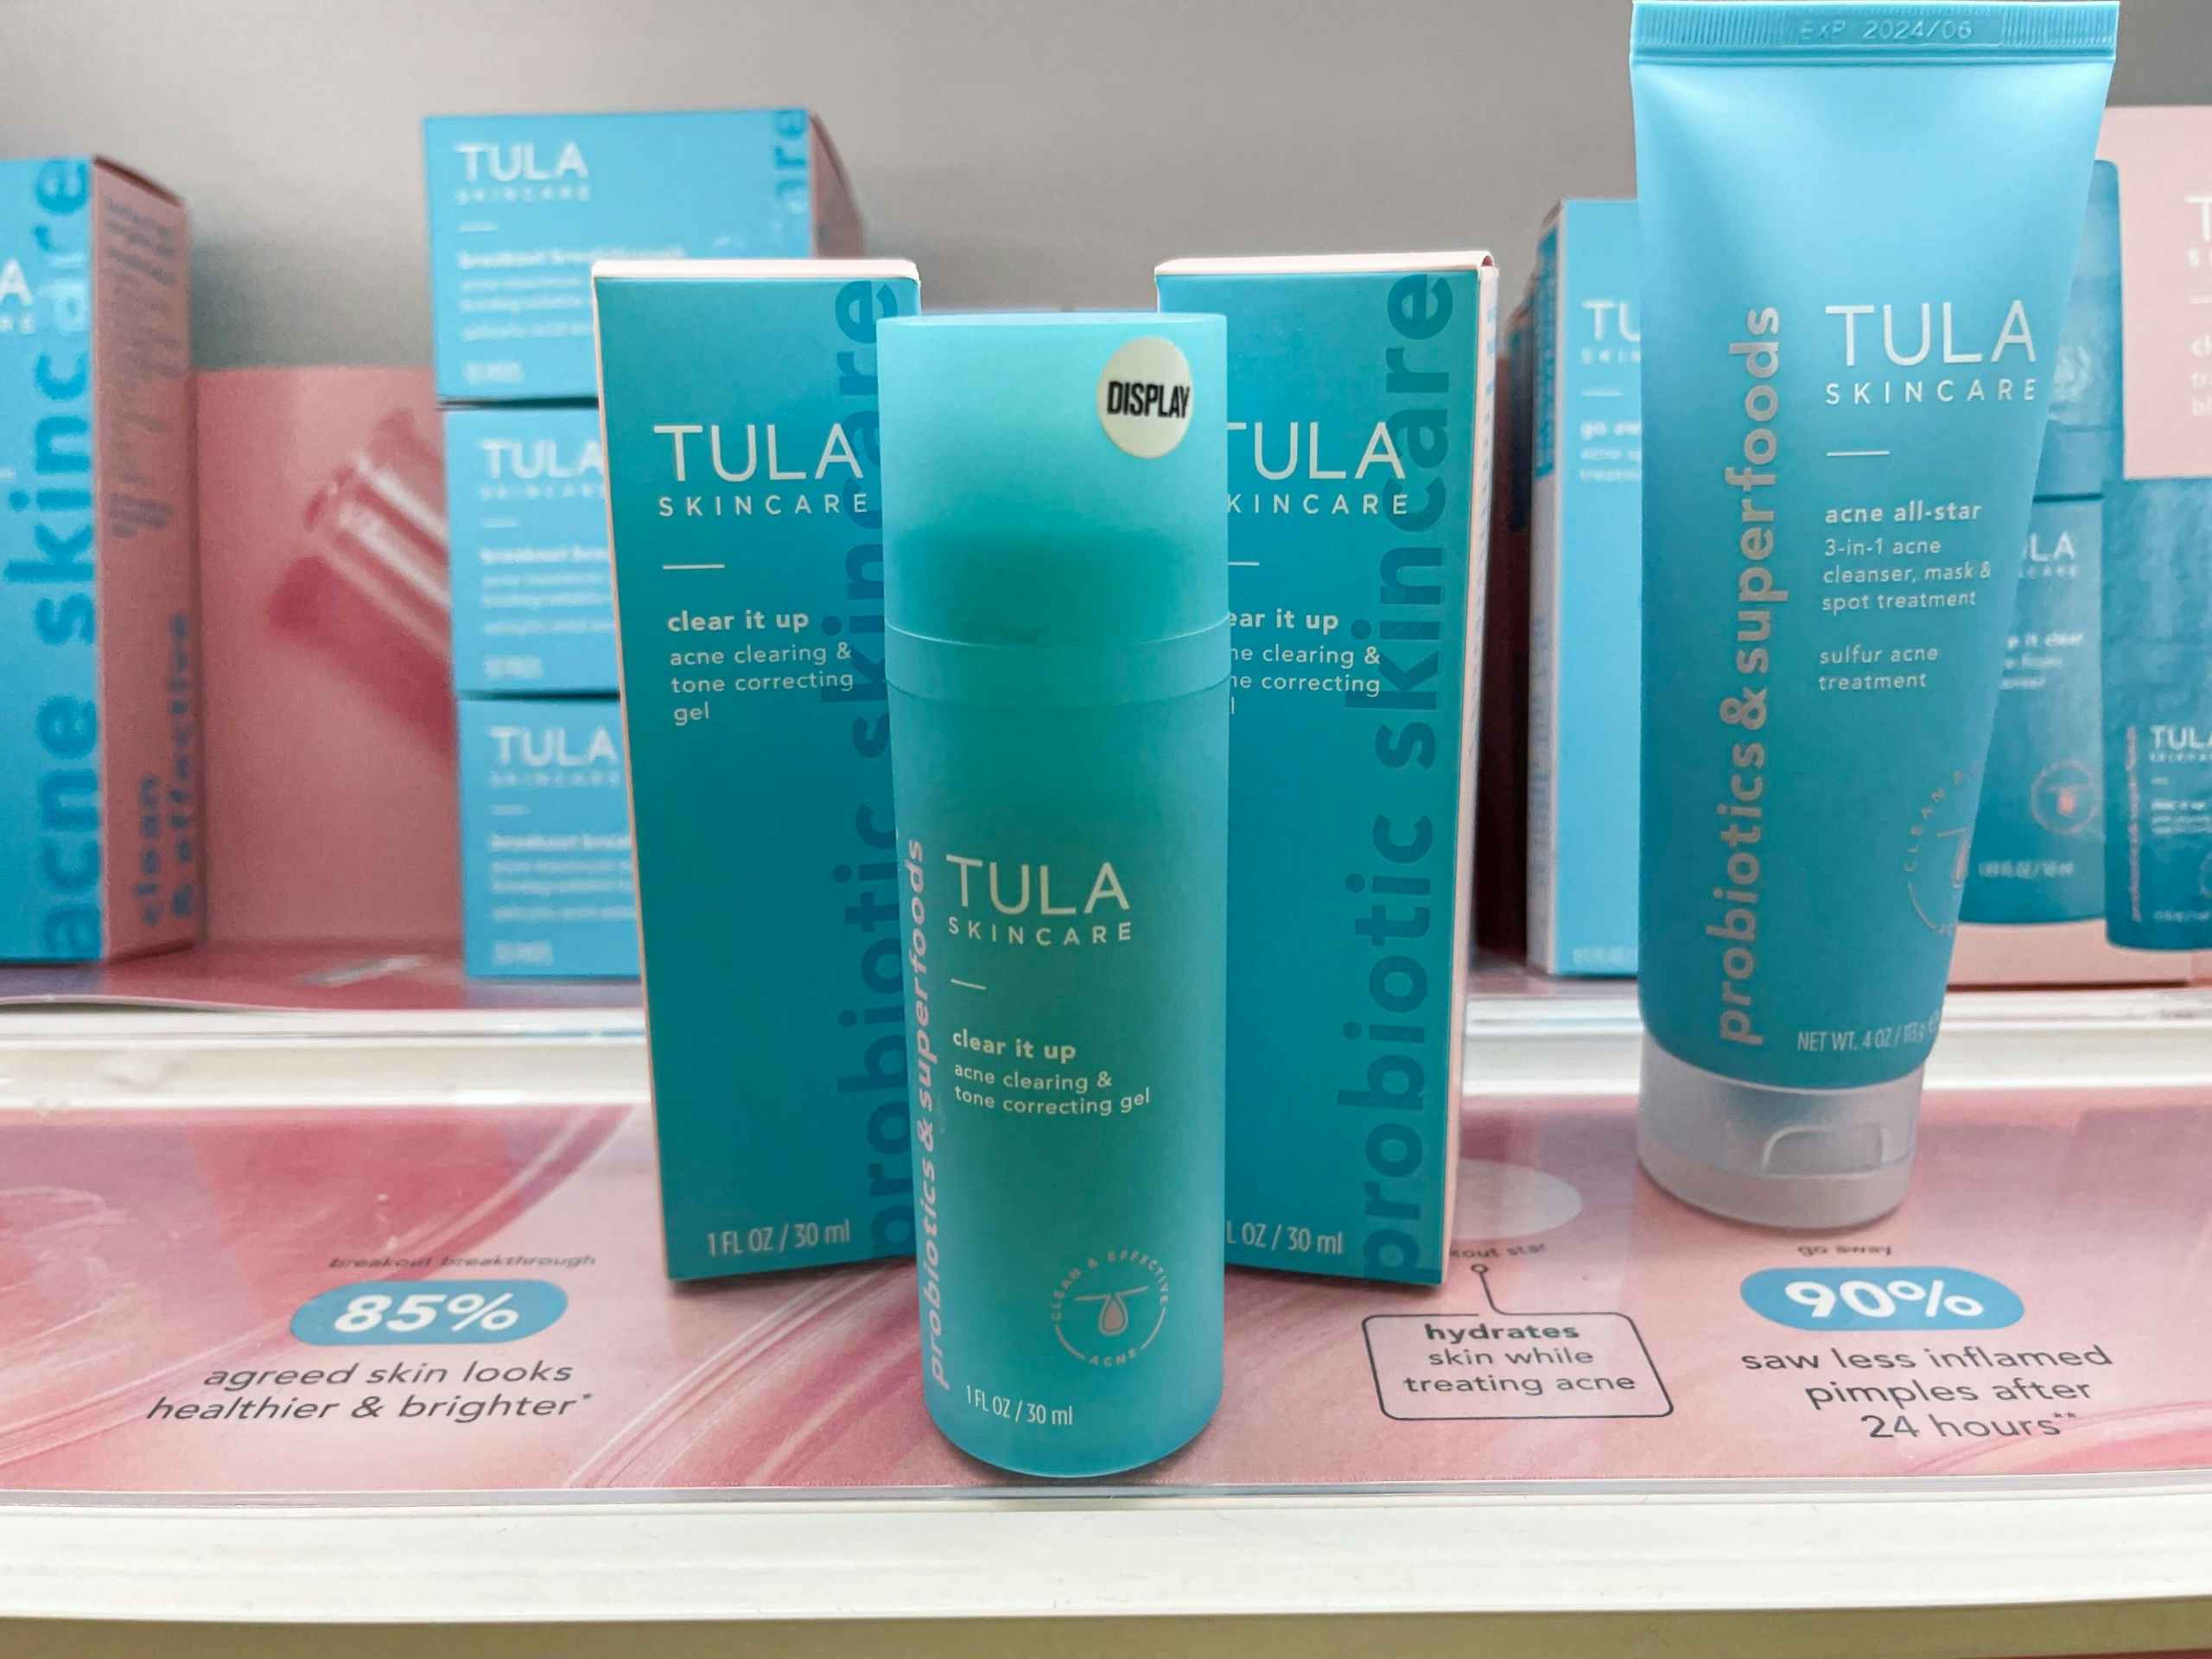 A bottle of Tula skincare clear it up acne clearing and tone correcting gel sitting on a store shelf with two boxes of Tula skincare clear it up acne clearing and tone correct in gel behind it.